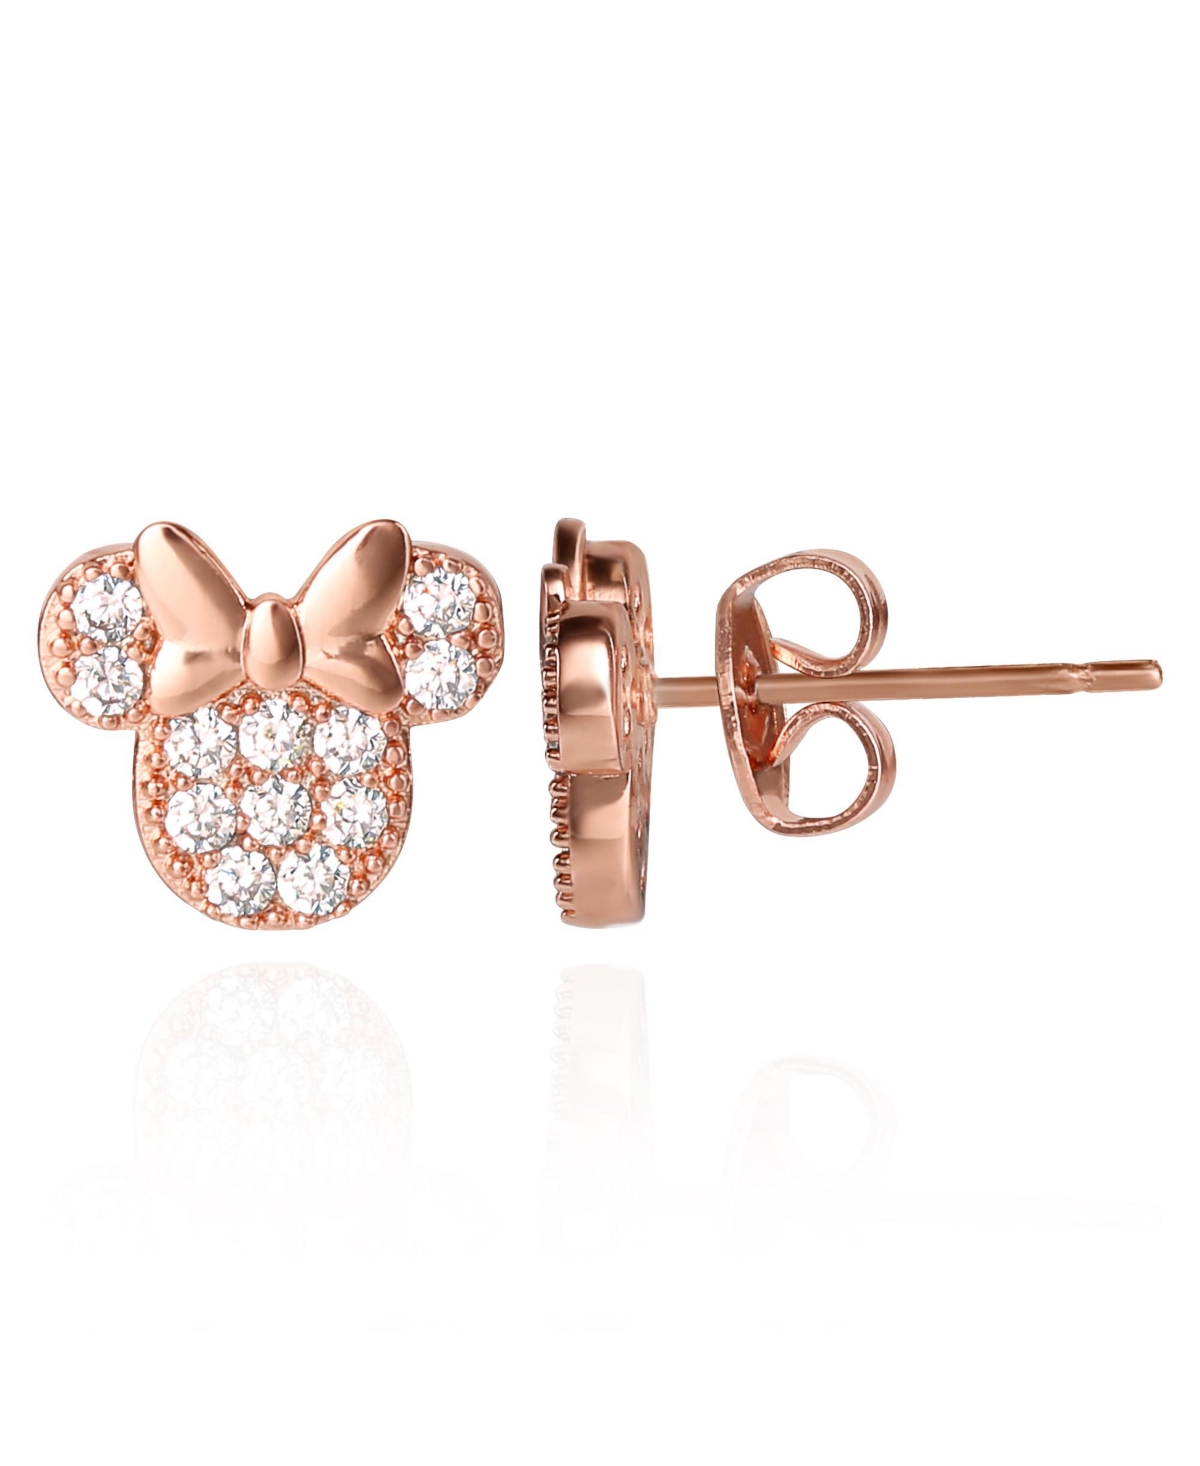 Minnie Mouse Cubic Zirconia Stud Earrings - Rose gold tone